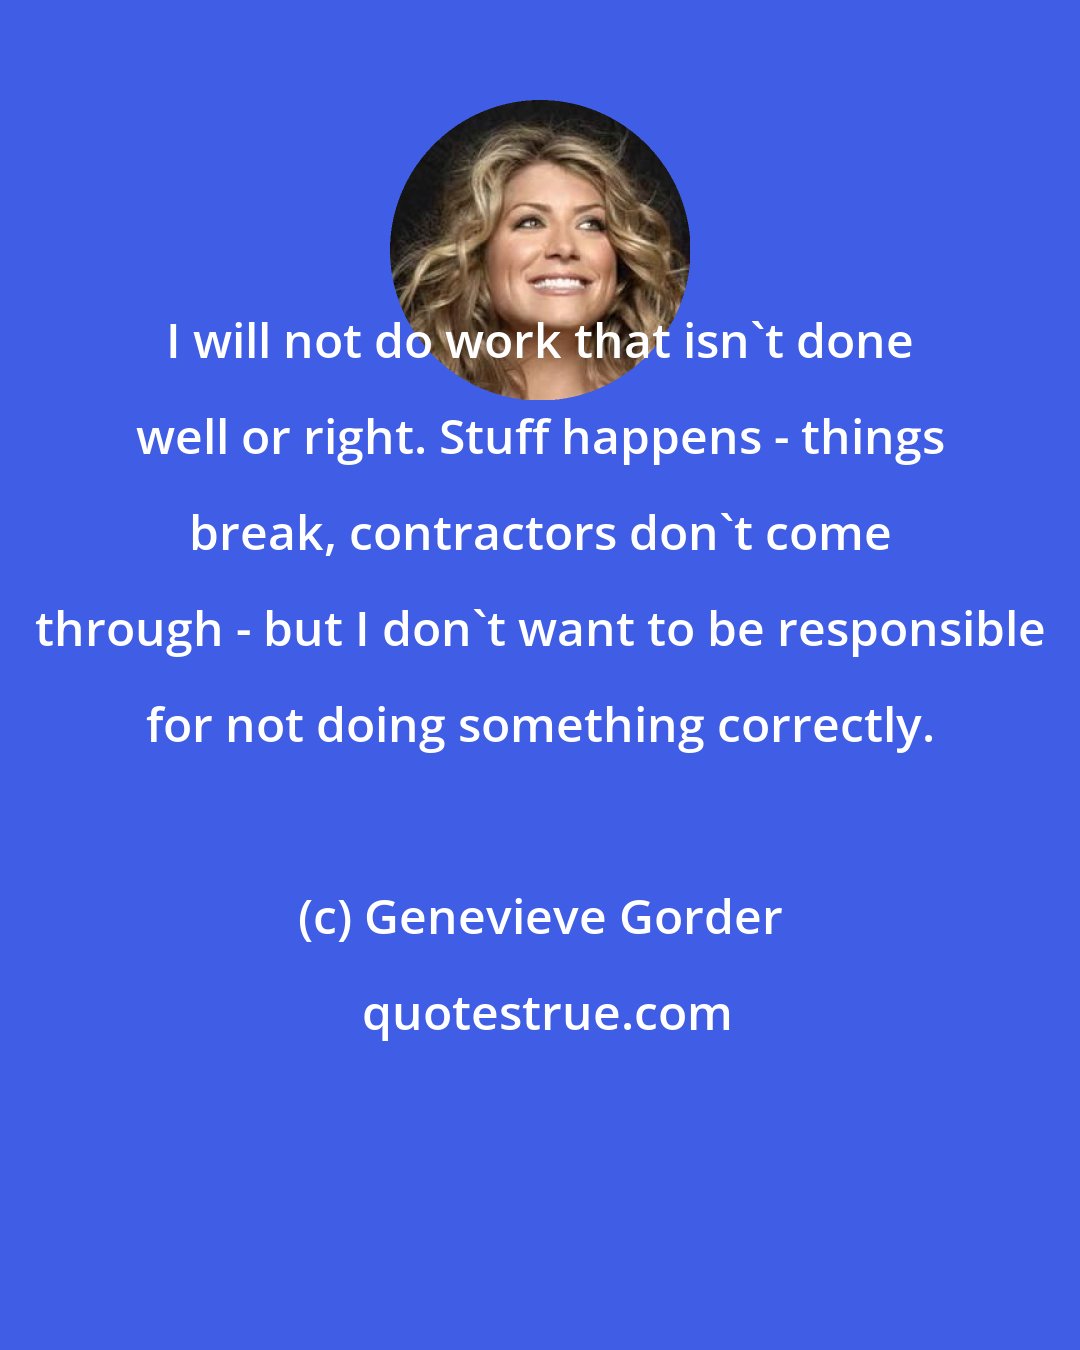 Genevieve Gorder: I will not do work that isn't done well or right. Stuff happens - things break, contractors don't come through - but I don't want to be responsible for not doing something correctly.